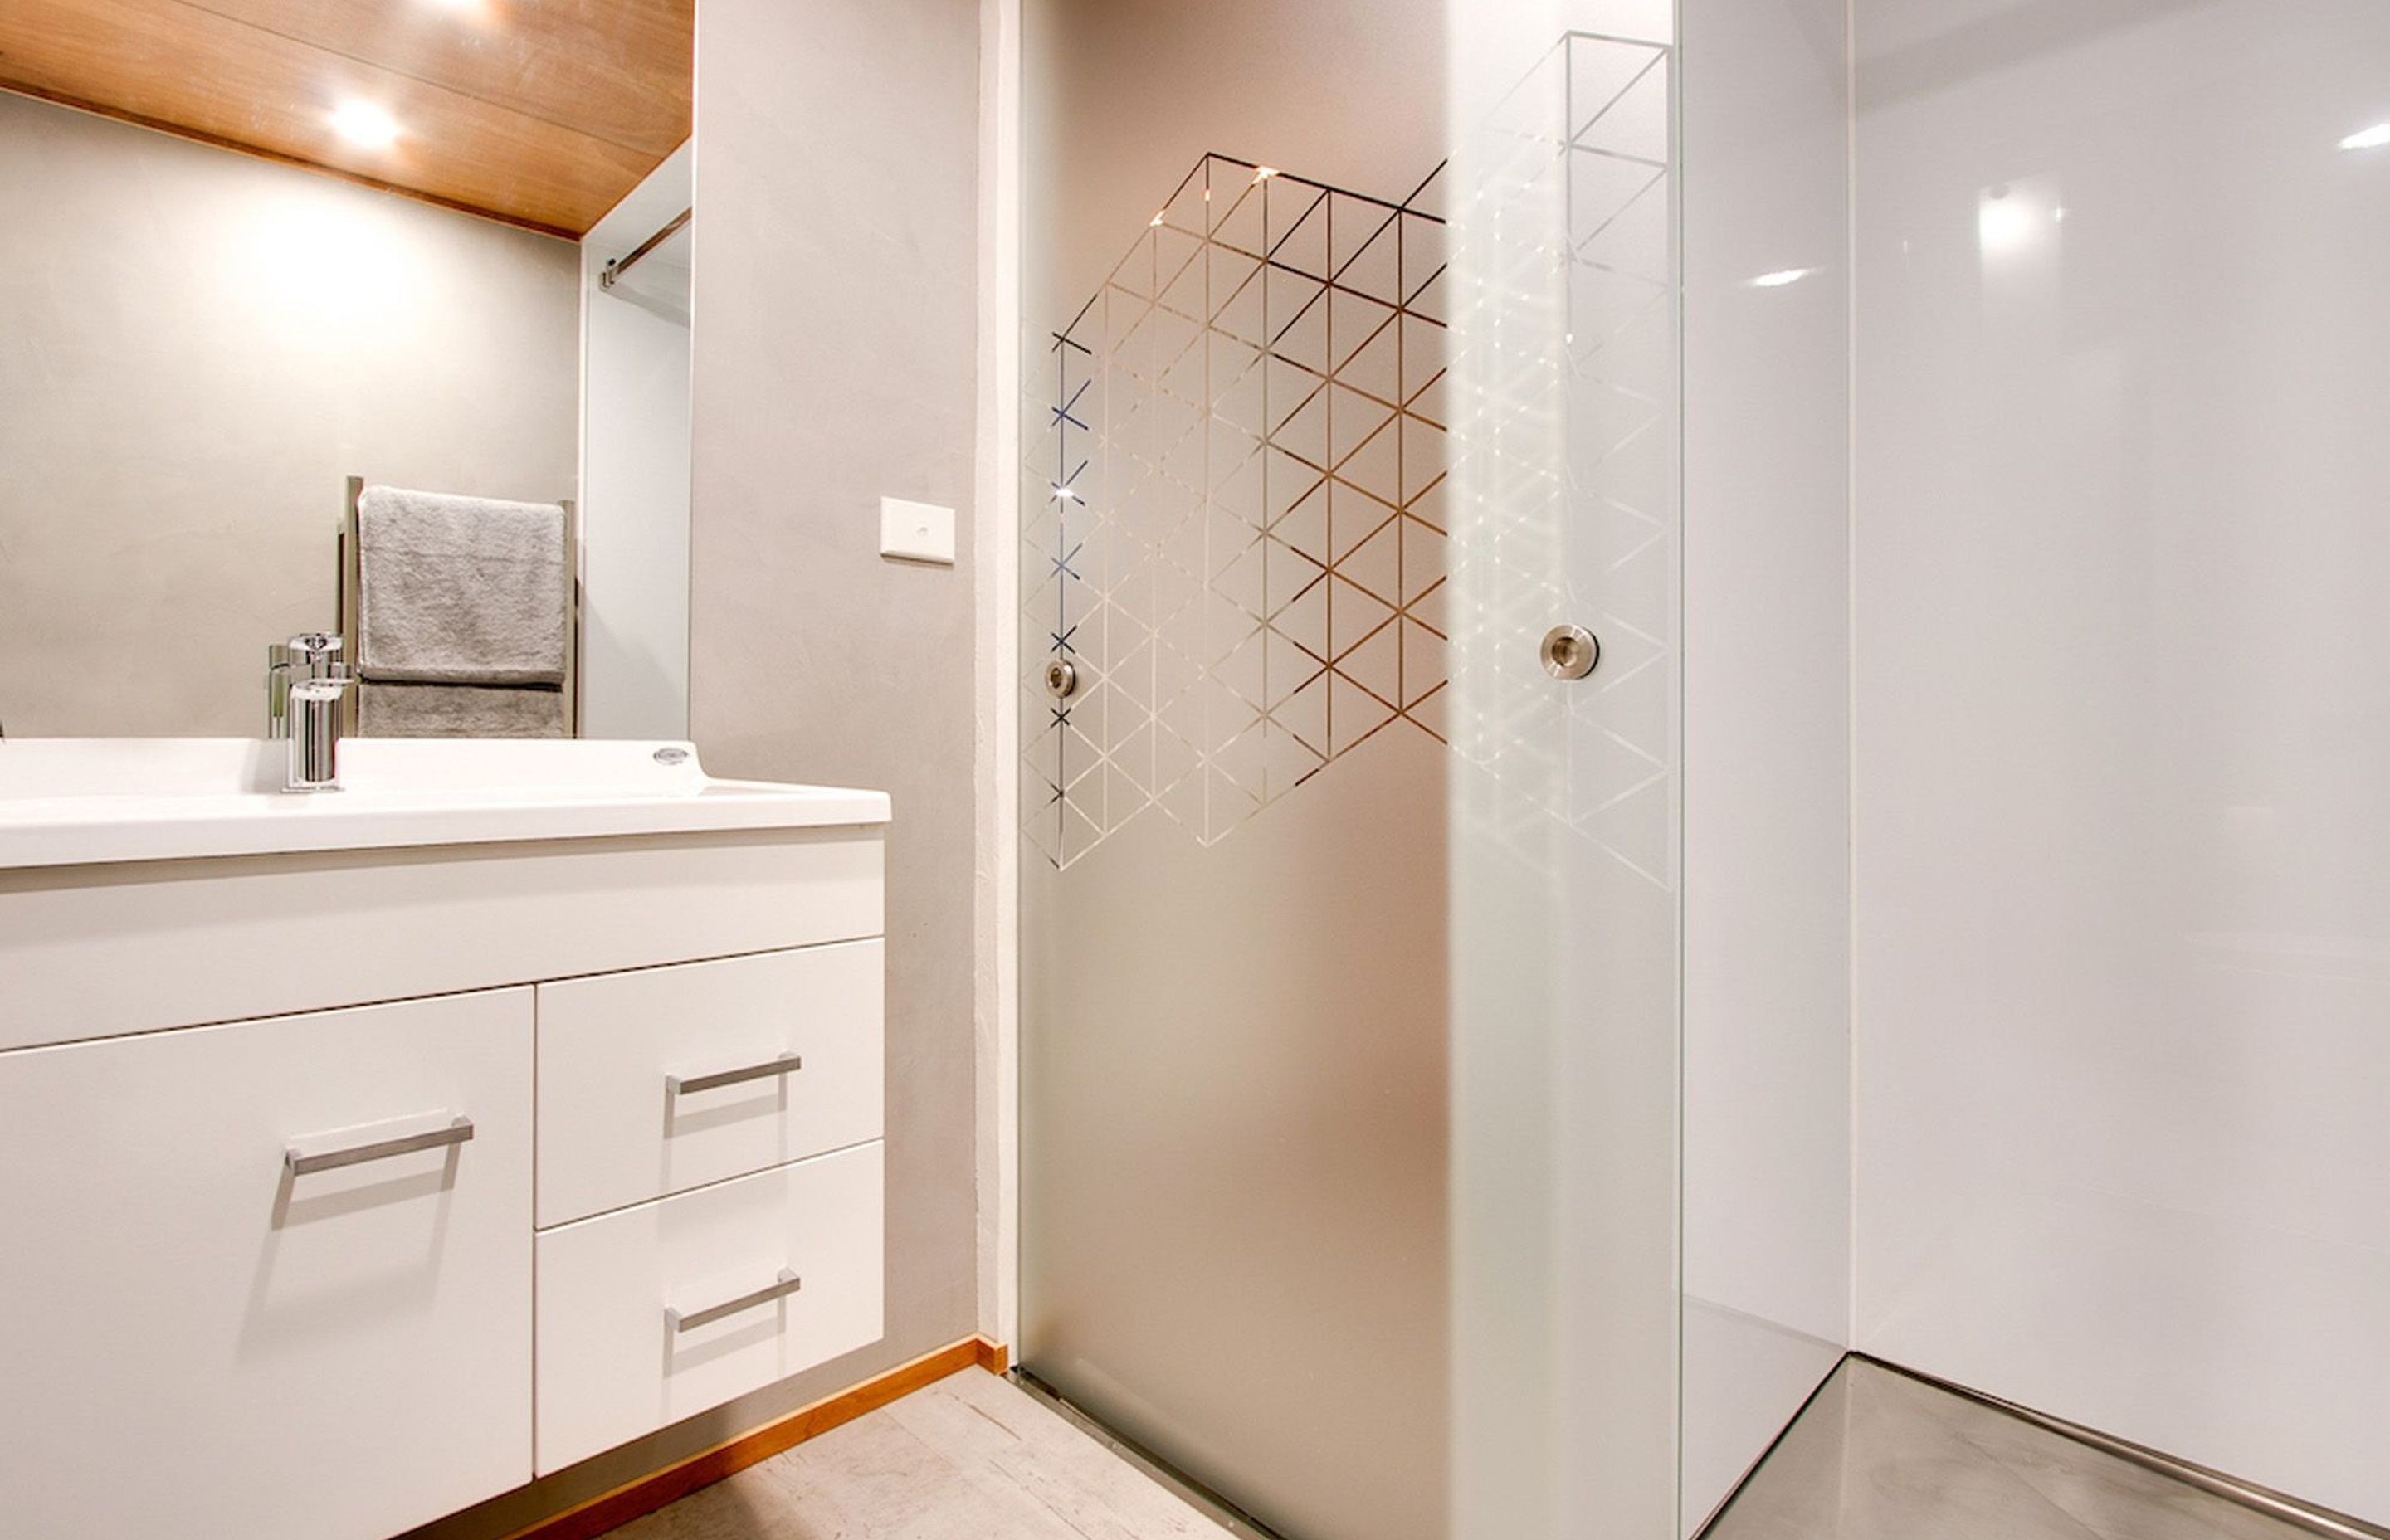 A geometric pattern is a feature on the shower door and window.